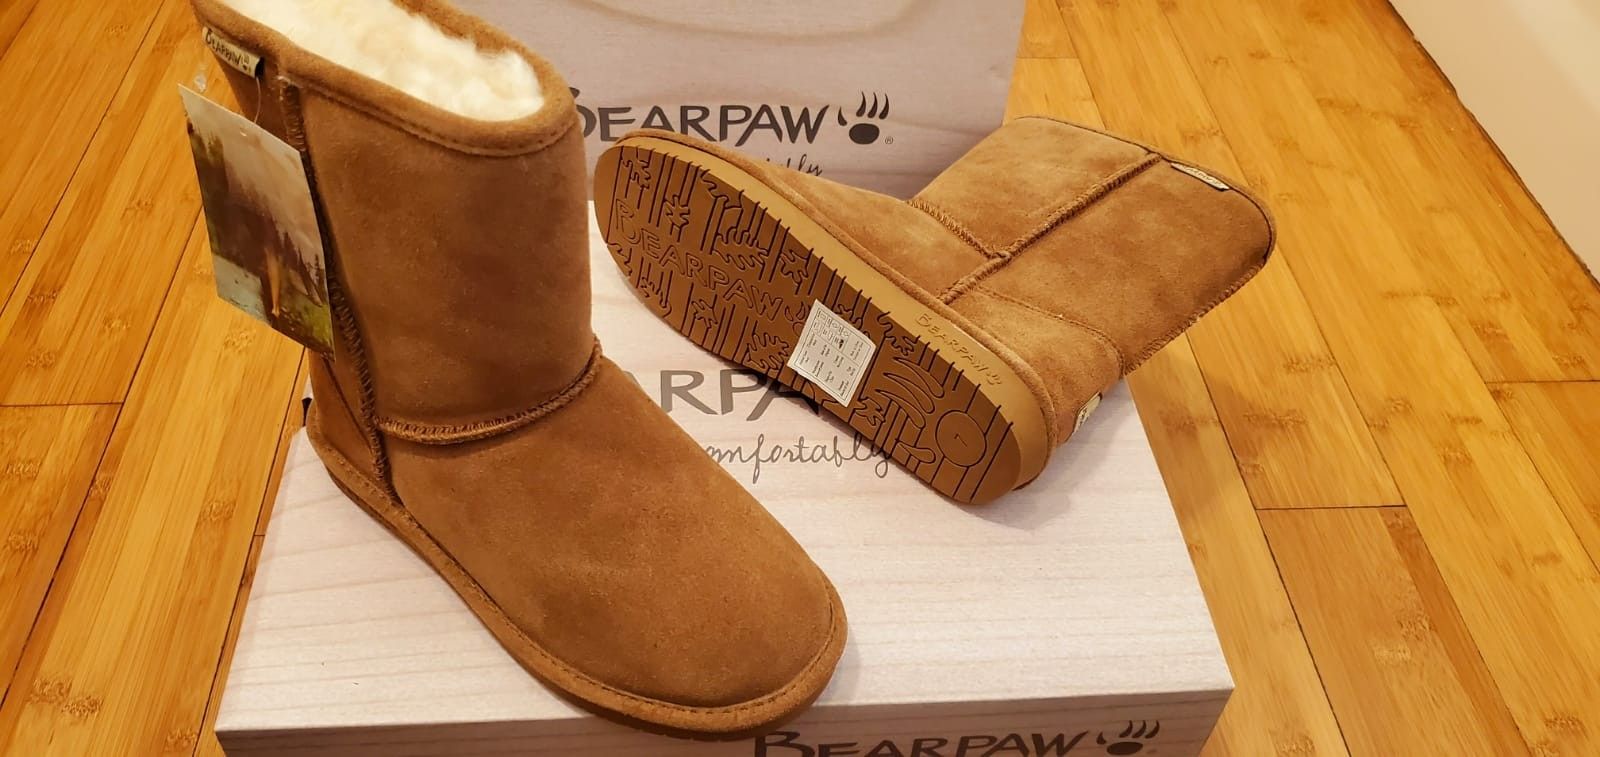 Bearpaw Short Boots size 7 and 8 for women .